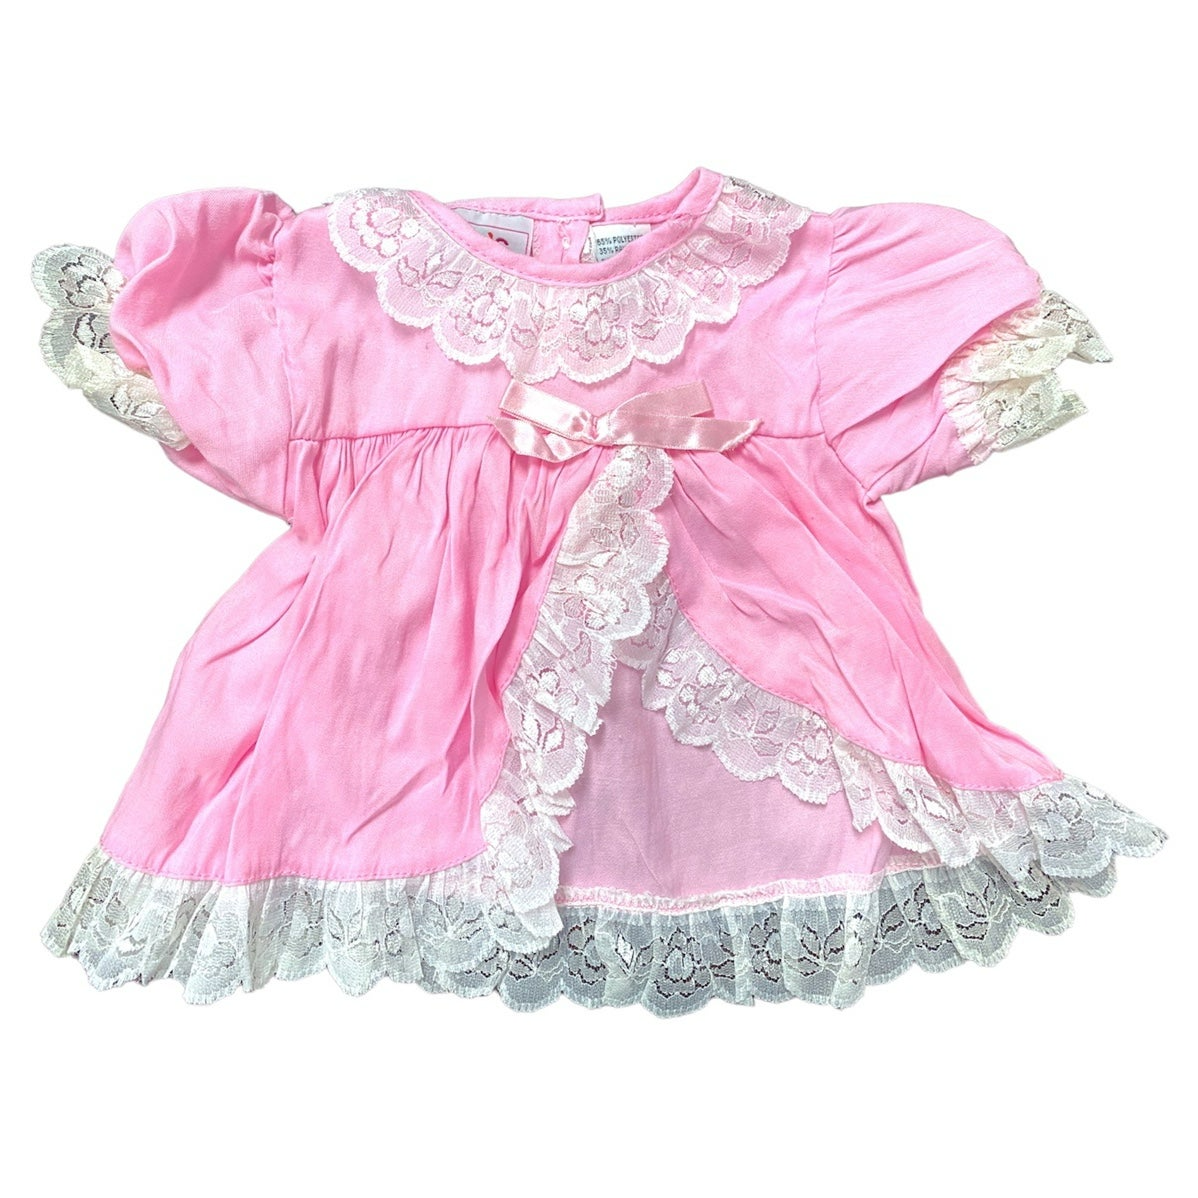 12 months vintage pink dress with lace